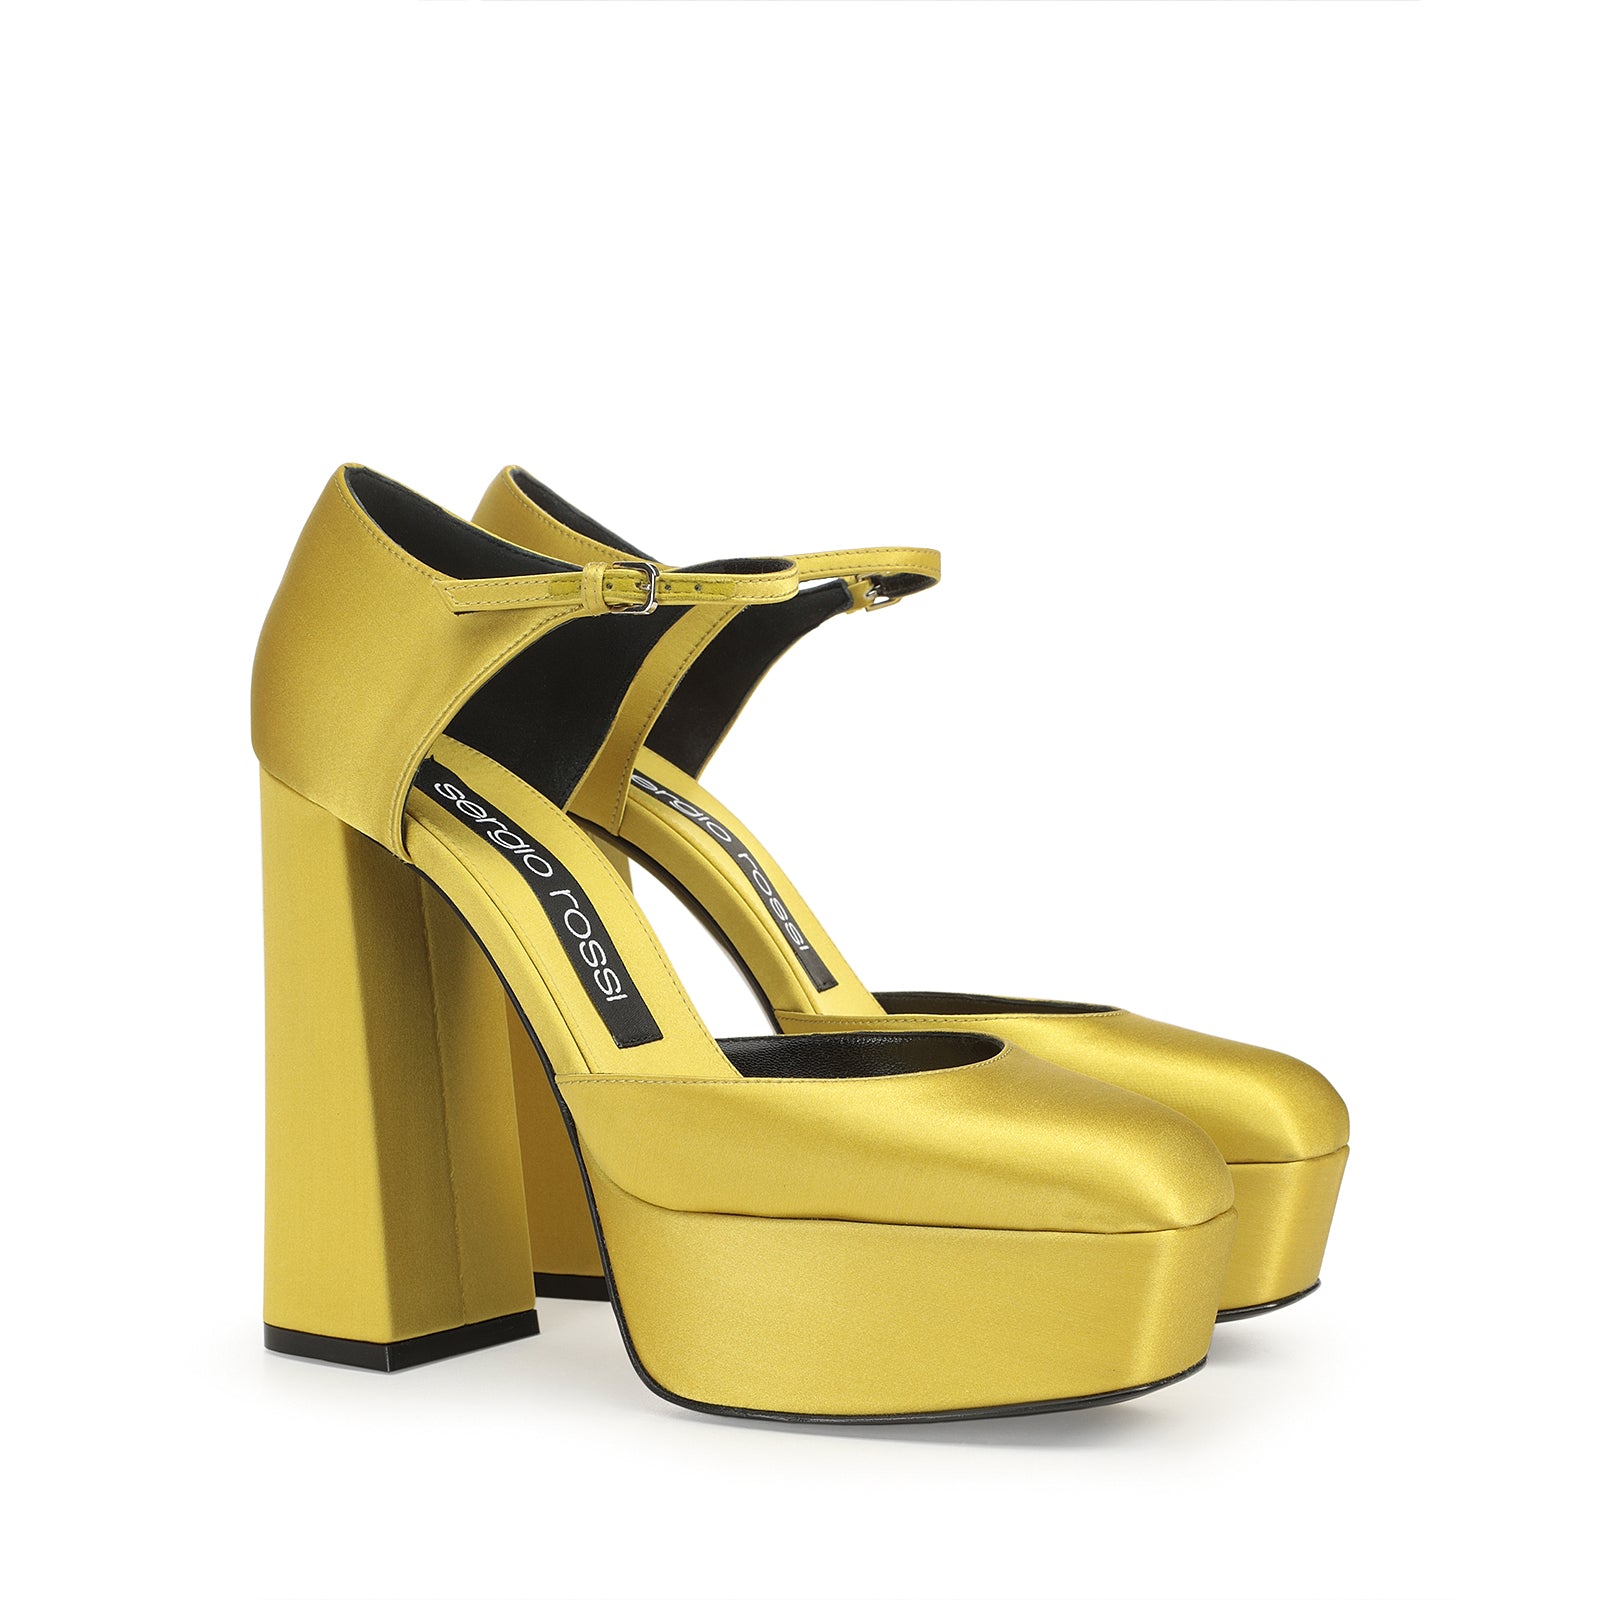 Sr Alicia wedge sandals 85 - Chartreuse